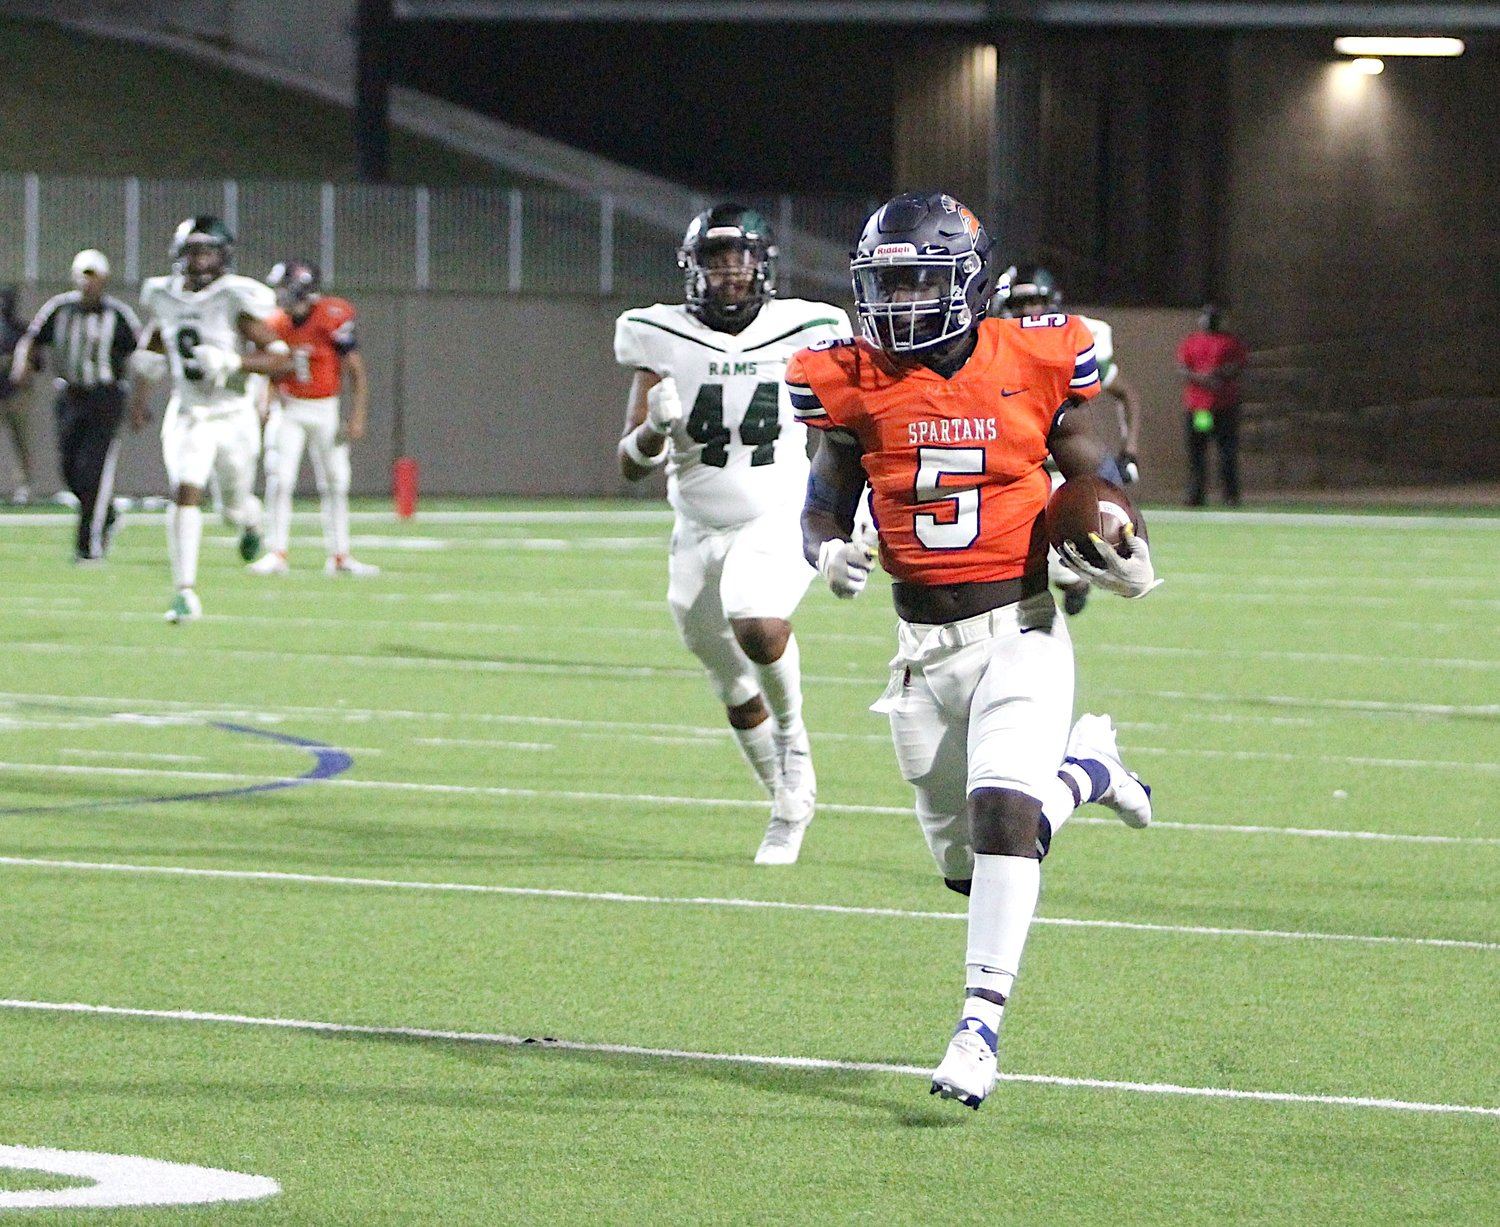 Seven Lakes senior running back Nick David-West runs for a 68-yard catch-and-run touchdown during the Spartans' win over Mayde Creek on Nov. 13 at Legacy Stadium.